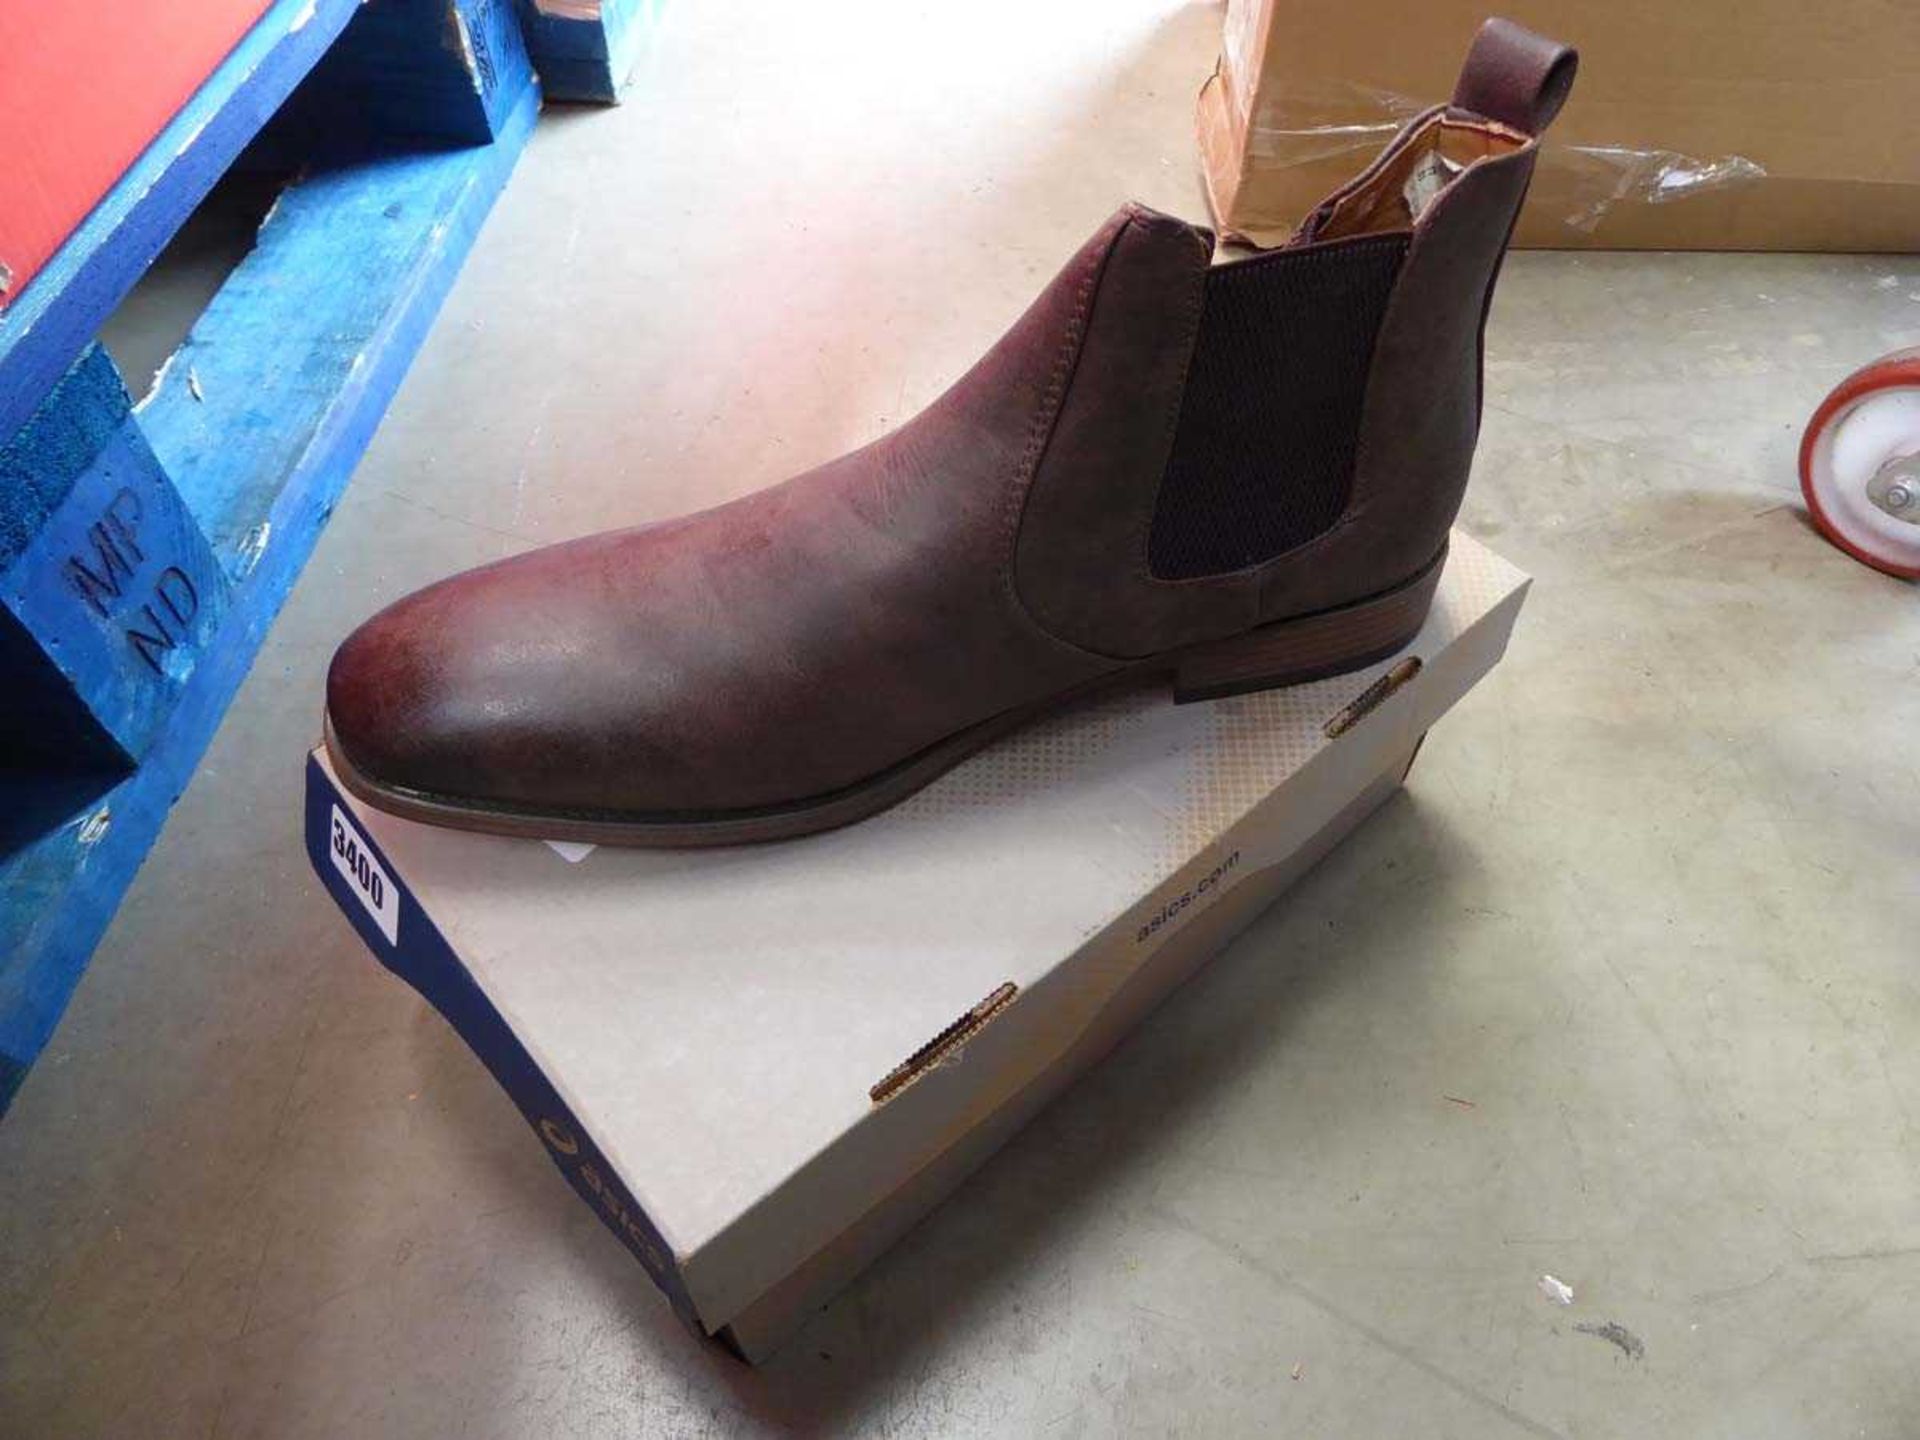 Pair of mens Chelsea style boots, size 10